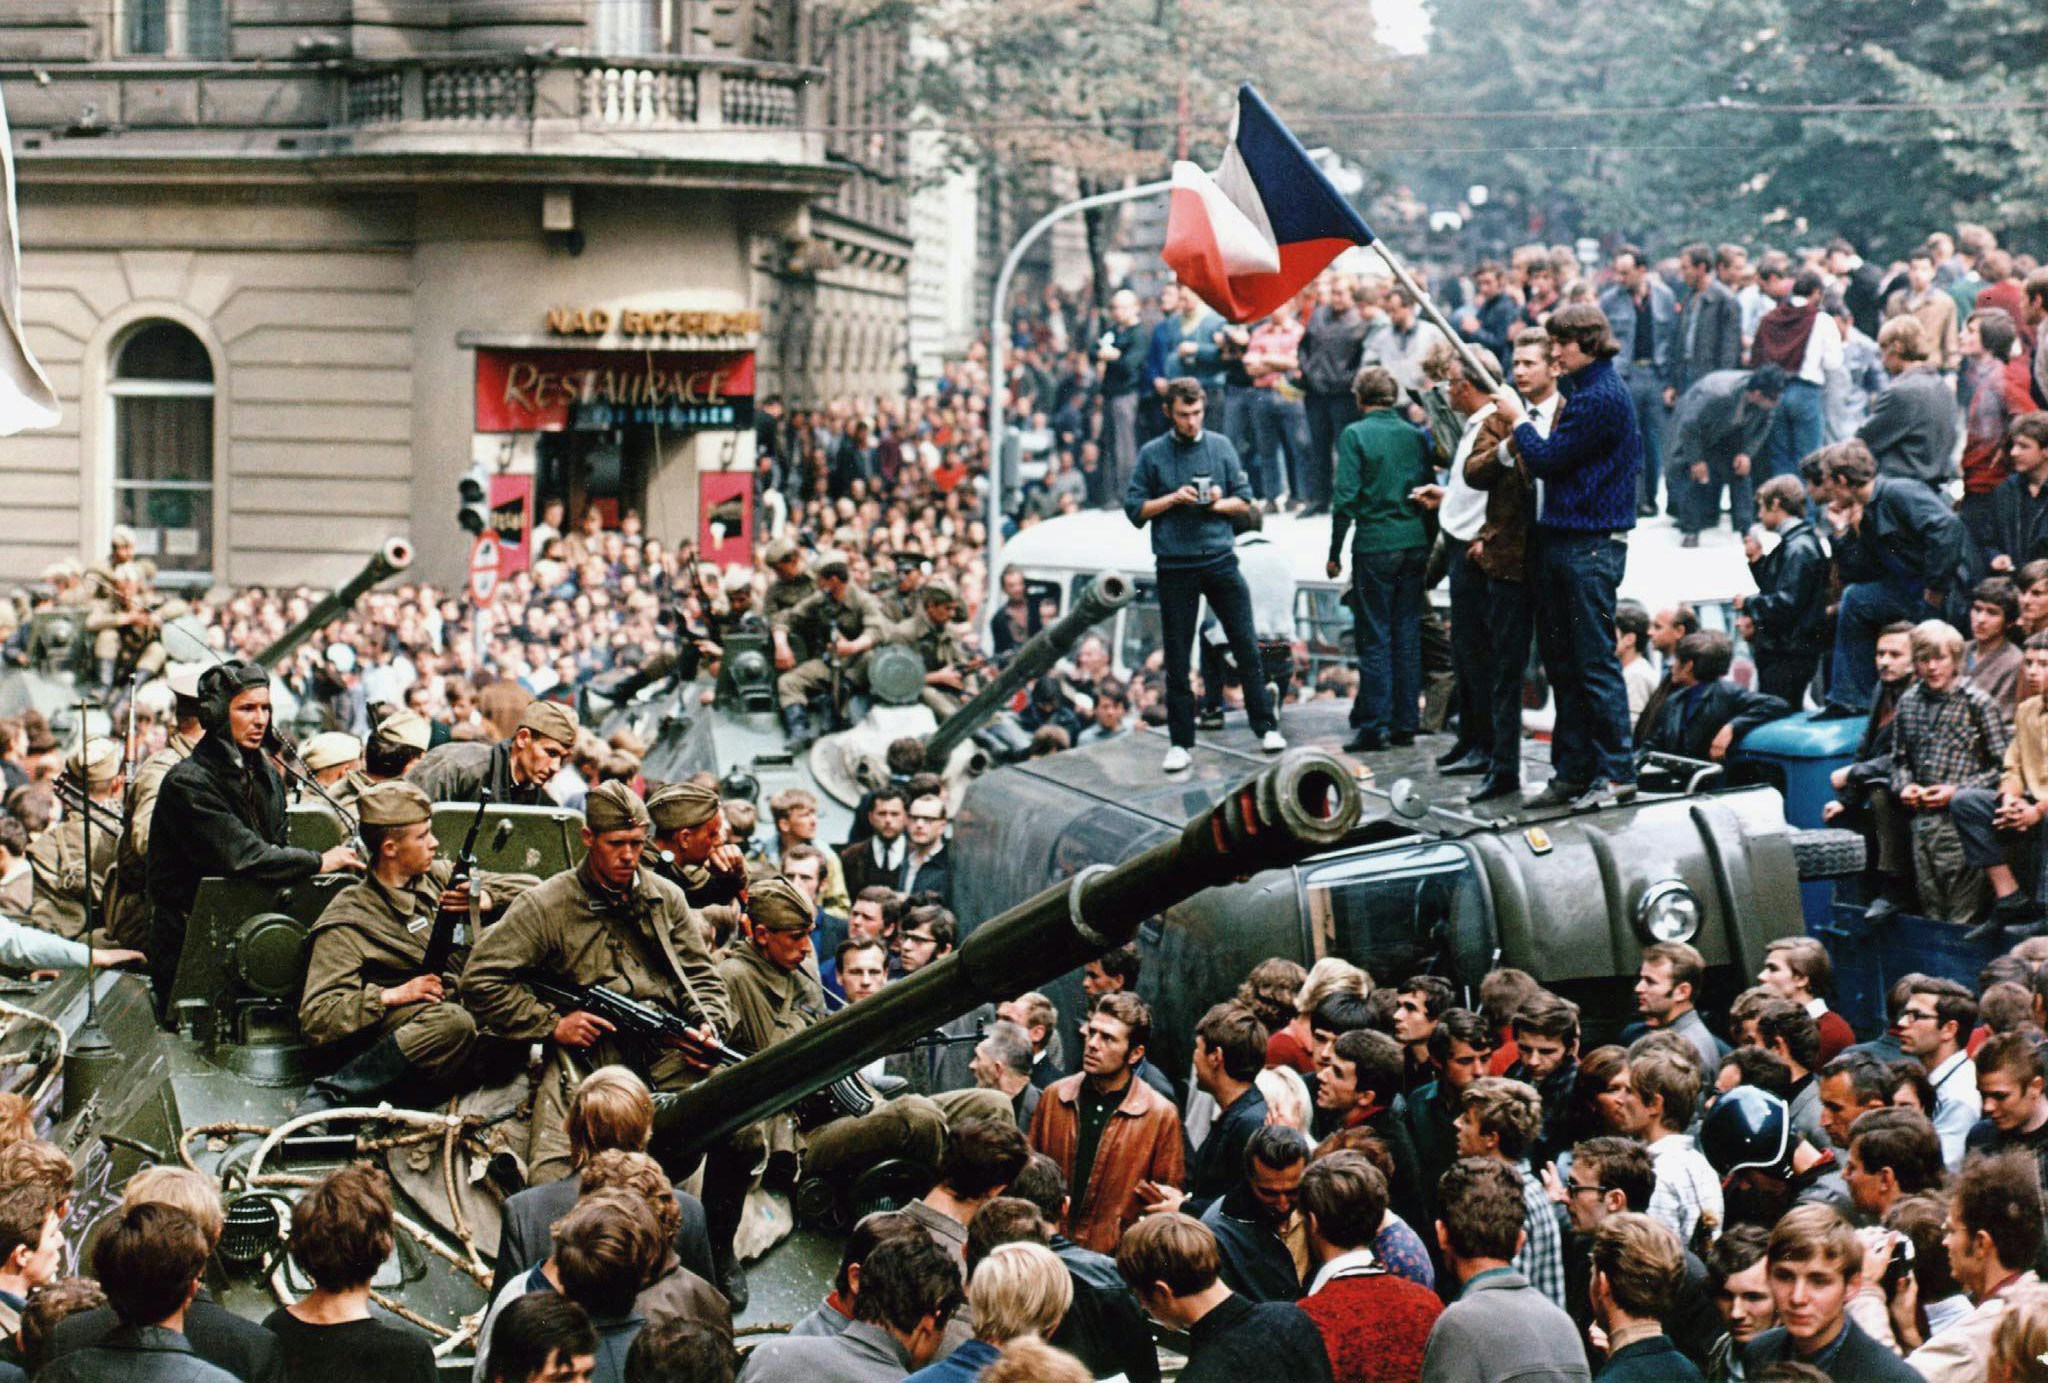 PRAGUE, CZECH REPUBLIC - AUGUST 21:  Czech youngsters holding a Czechoslovak flag stand atop an overturned truck as other Prague residents surround Soviet tanks in  Prague on 21 August 1968 as the Soviet-led invasion by the Warsaw Pact armies crushed the so called Prague Spring reform in former Czechoslovakia.  (Photo credit should read LIBOR HAJSKY/AFP/Getty Images)